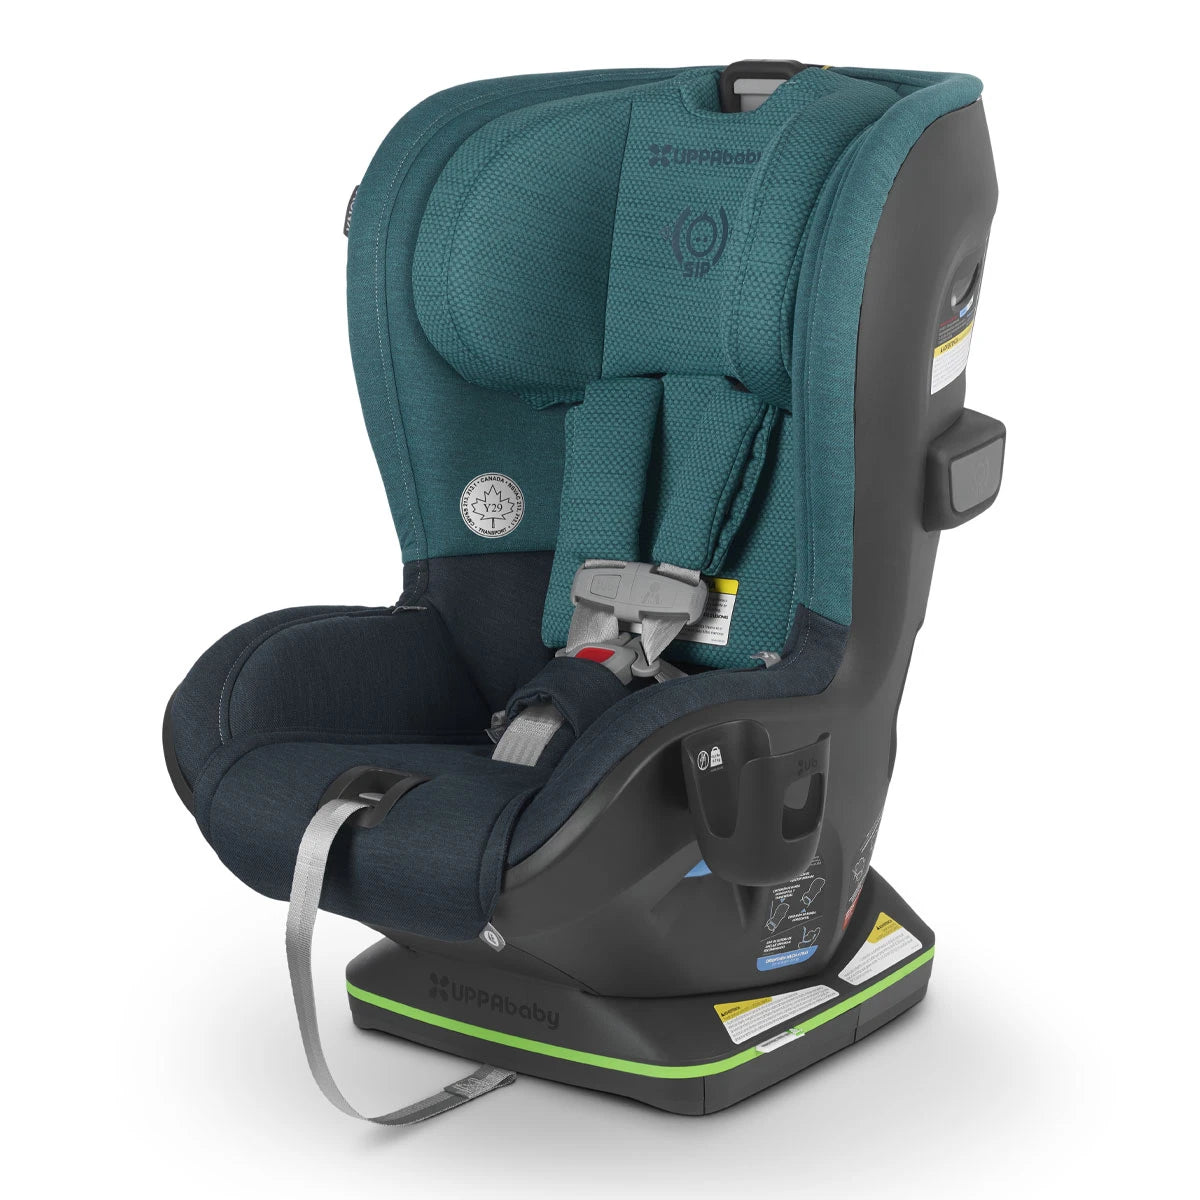 UPPAbaby Siège auto convertible KNOX | Lucques